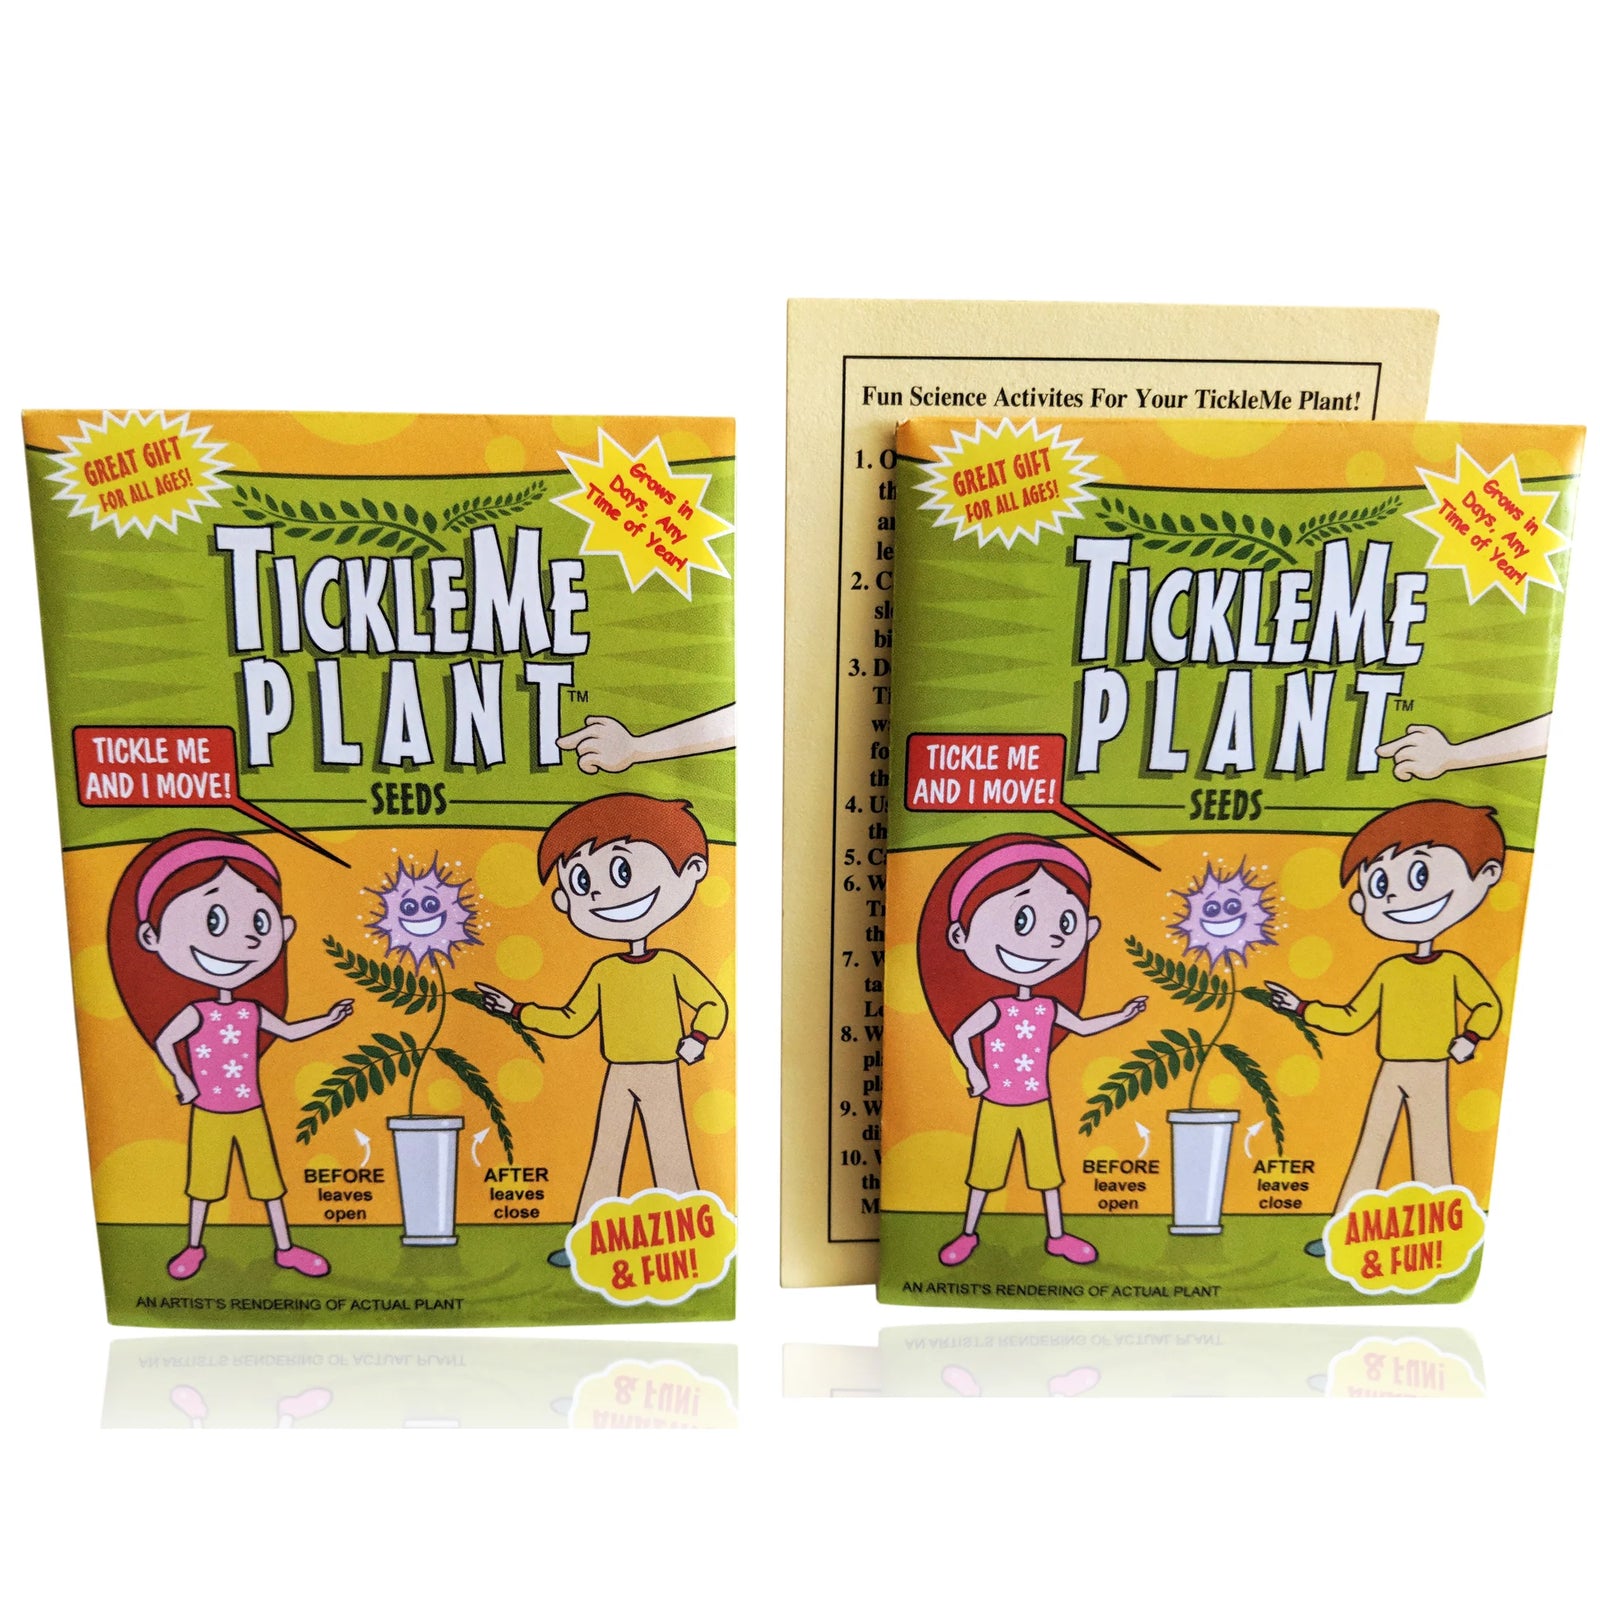 TickleMe Plant seed packets ( Mimosa pudica) grow this very sensitive and shy plant at home.